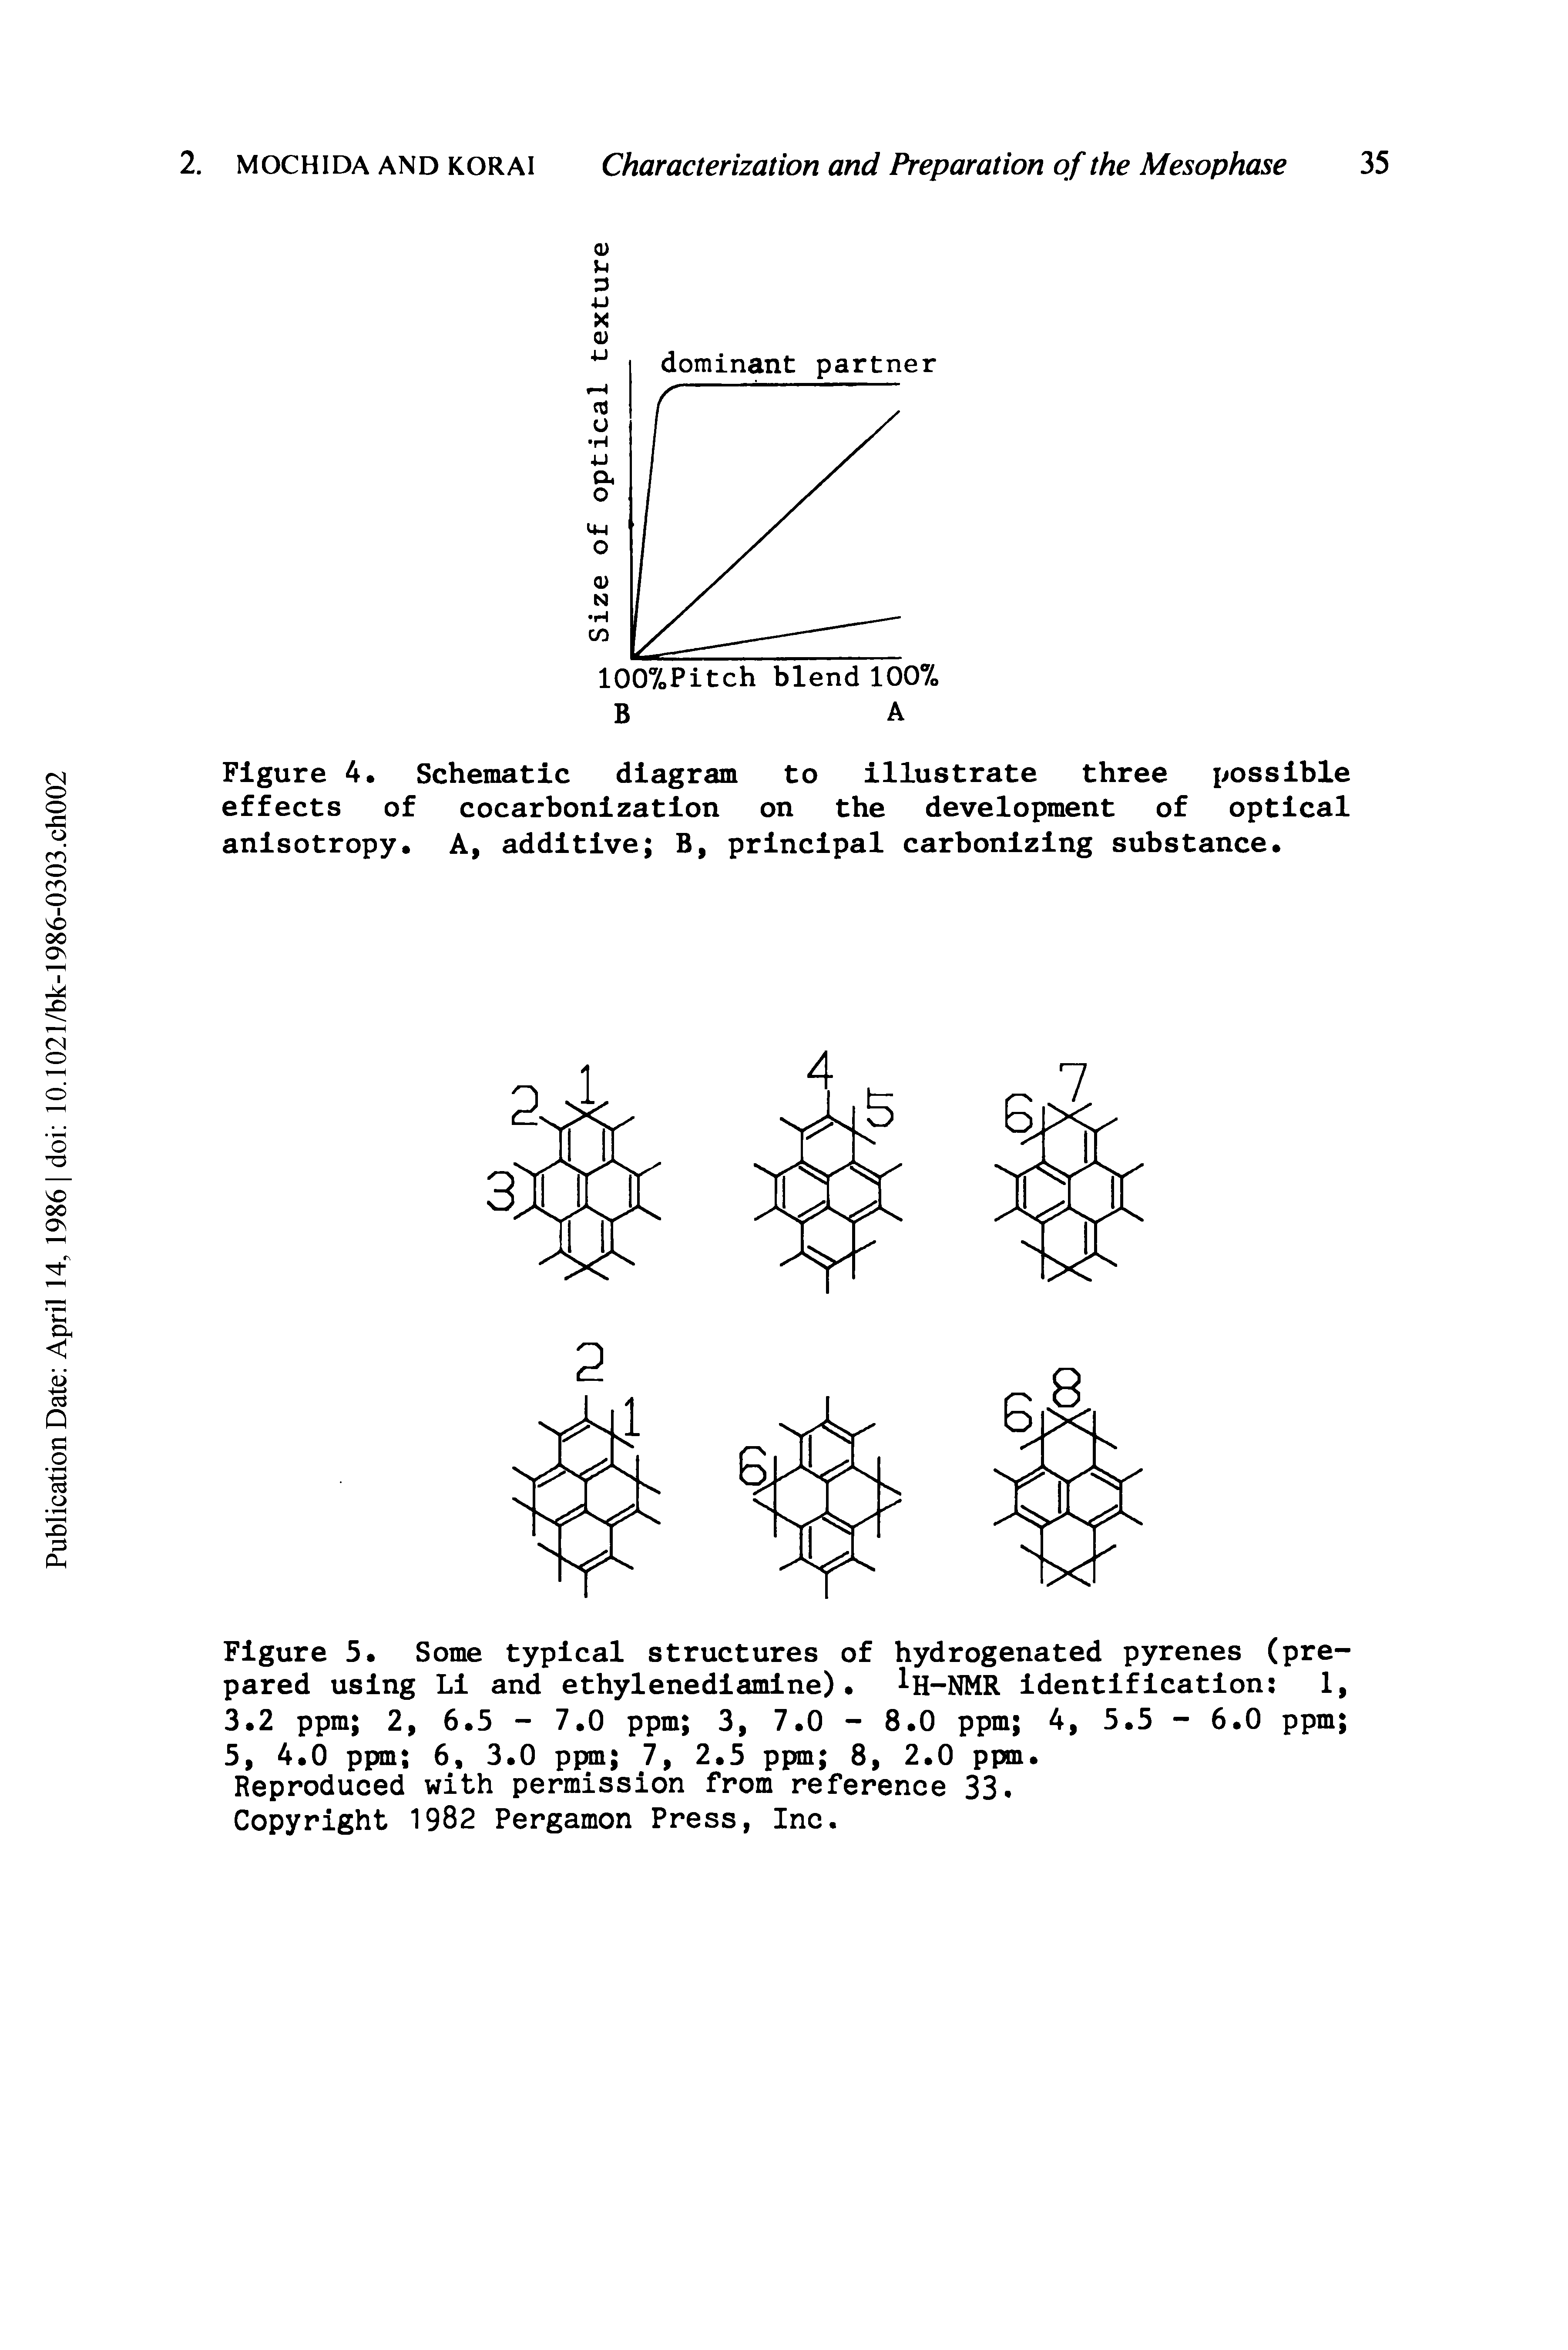 Figure 4. Schematic diagram to illustrate three possible effects of cocarbonization on the development of optical anisotropy. A, additive B, principal carbonizing substance.